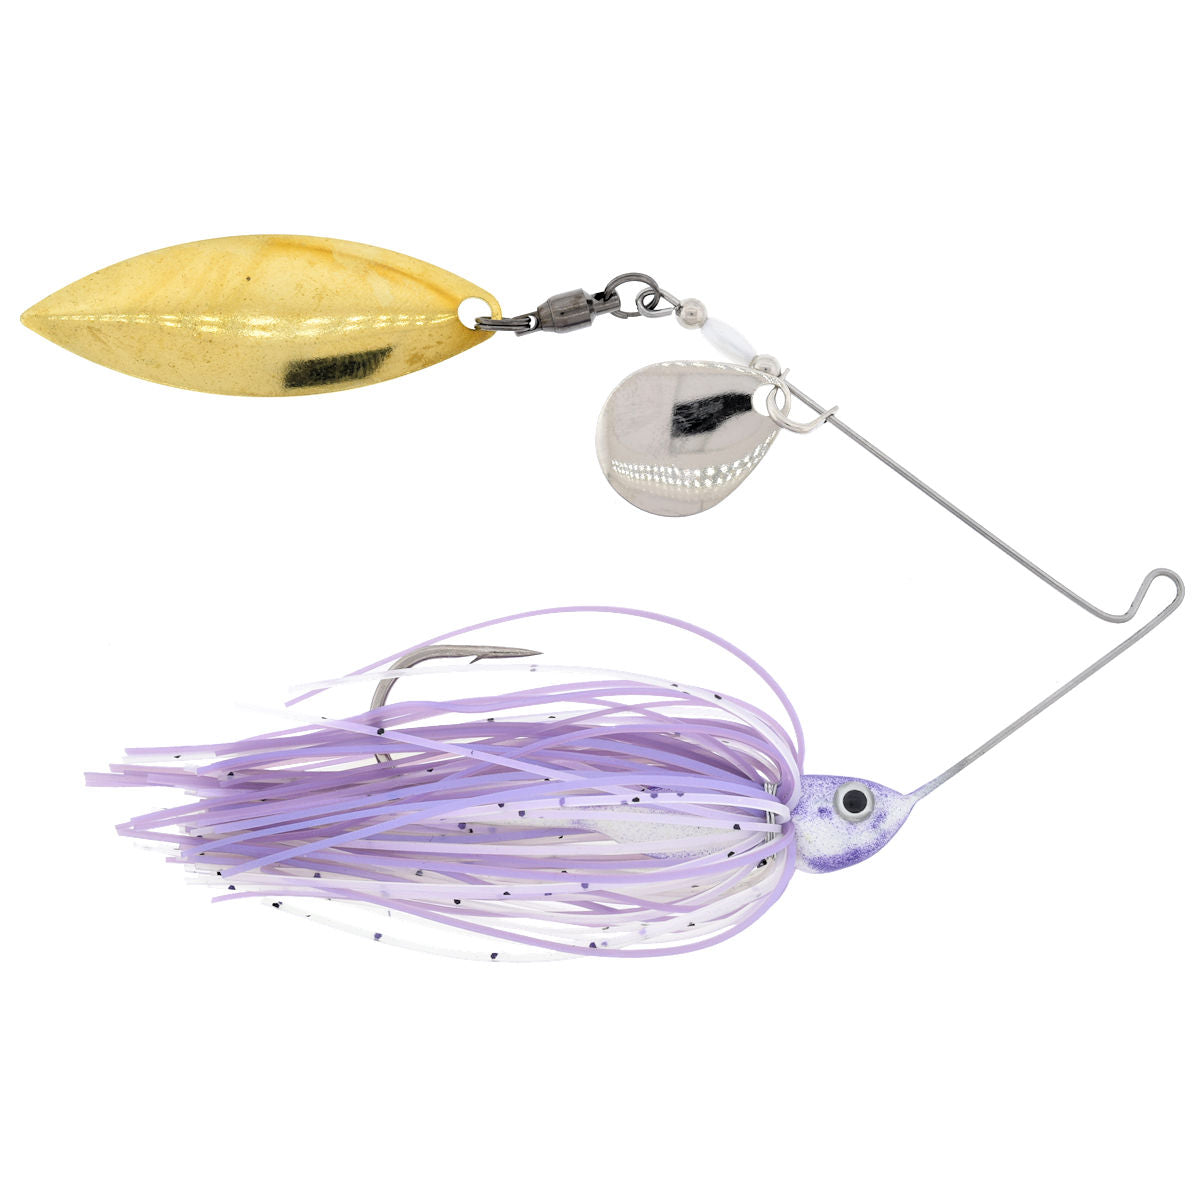 Glimmer Series Colorado/Willow Spinnerbait_Purple Shad - Silver/Gold